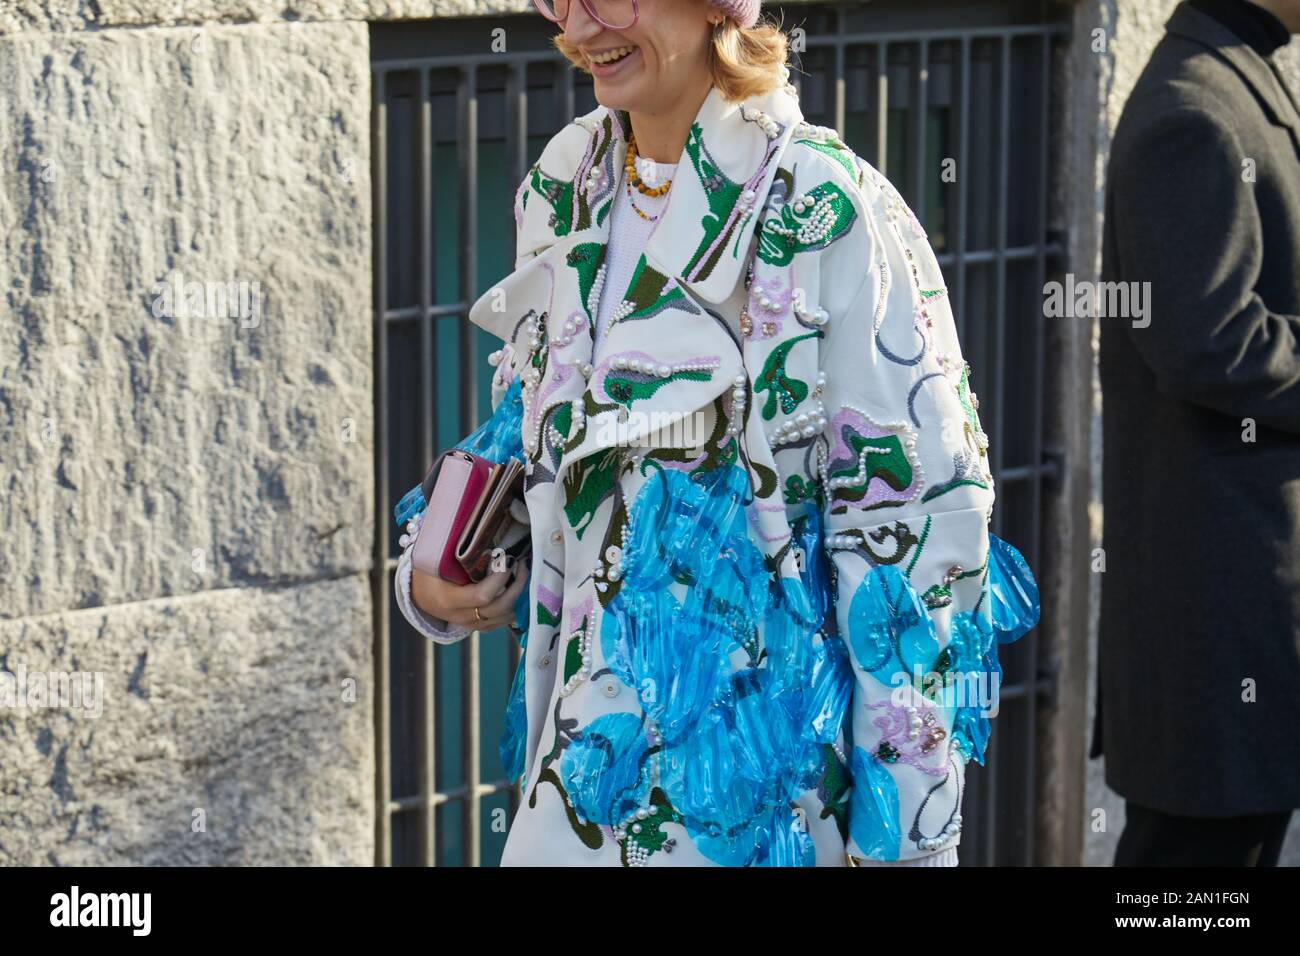 MILAN, ITALY - JANUARY 11, 2019: Woman with white jacket with floral design and blue transparent details before Emporio Armani fashion show, Milan Fas Stock Photo